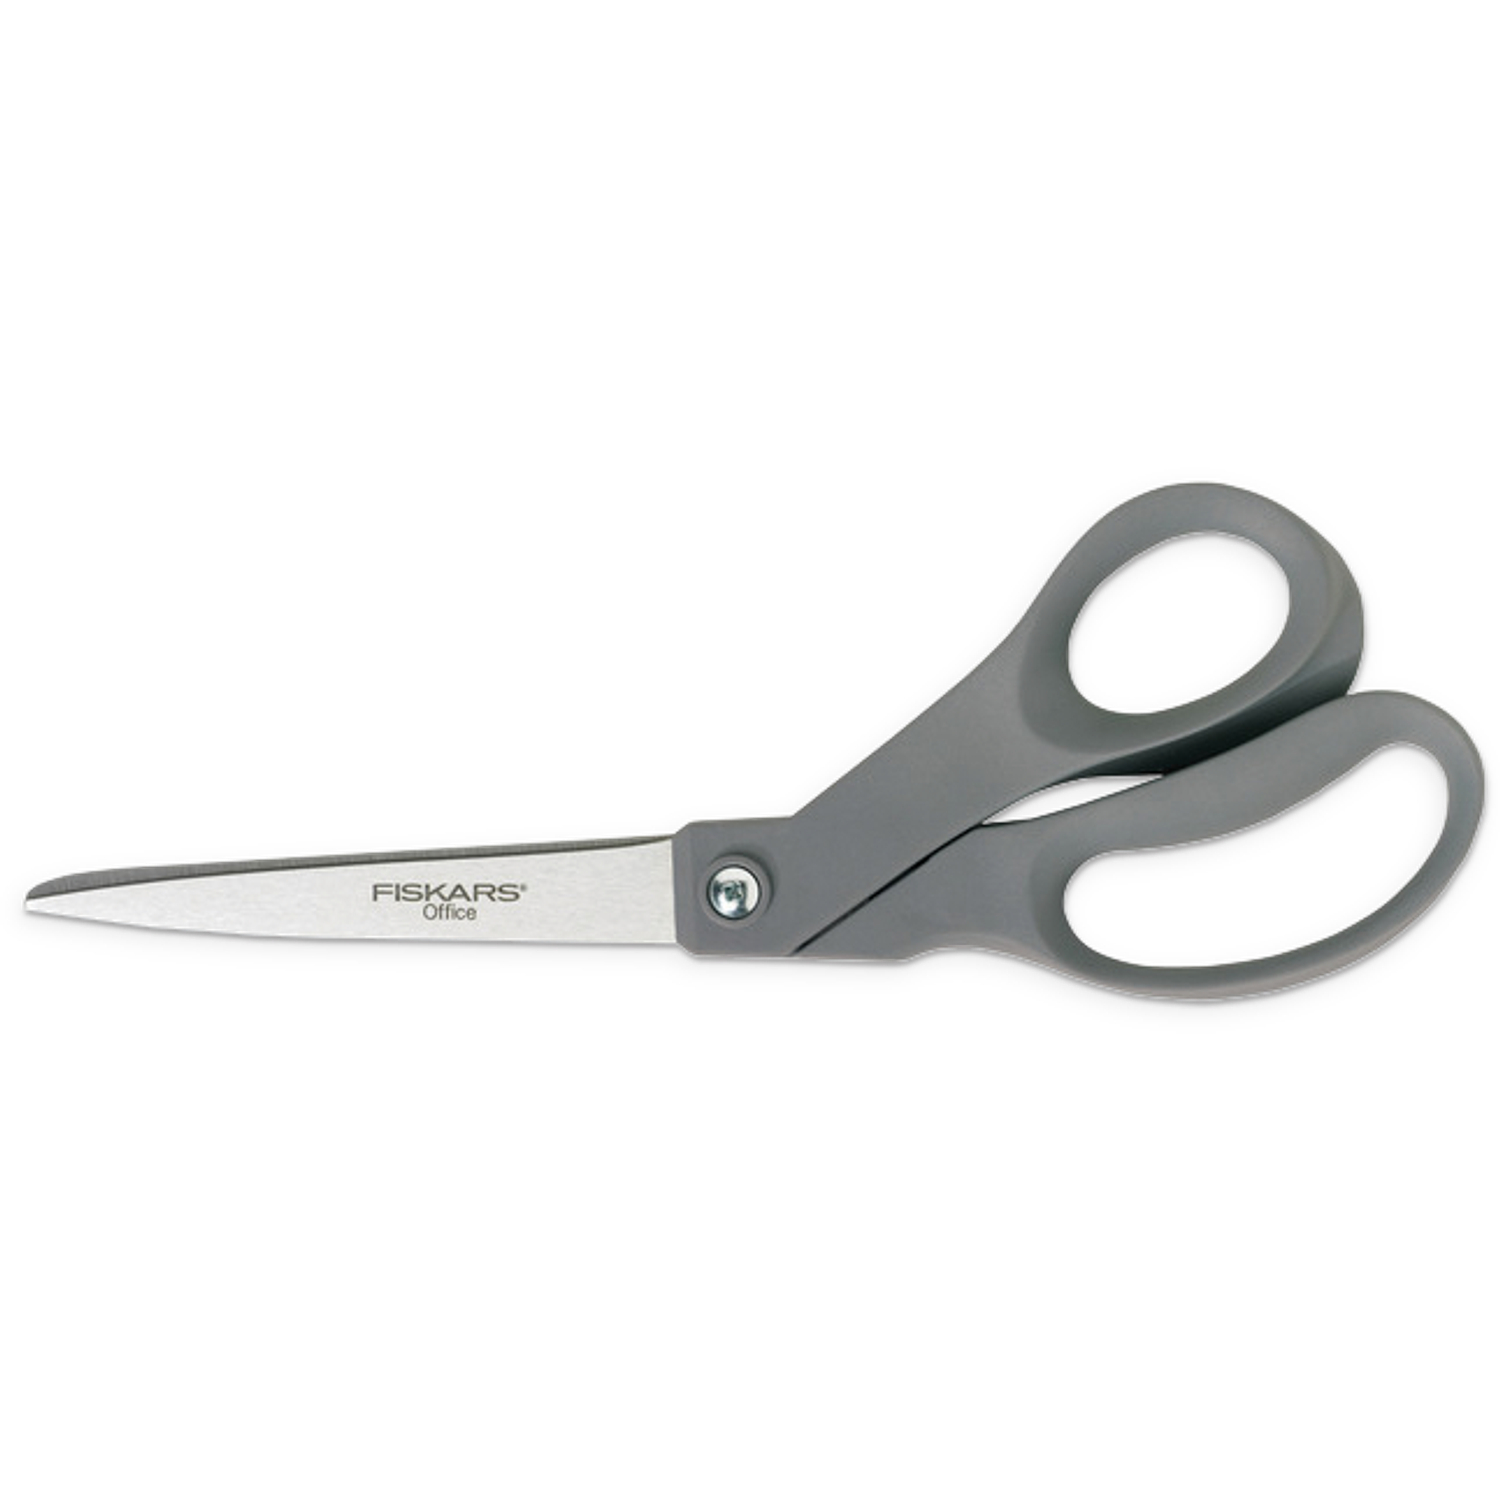 Fiskars Scissors: Stainless Steel Blade - Right Hand, Bent Handle, Bubble Wrap, Craft, Paper, String & Tape | Part #01-004761J